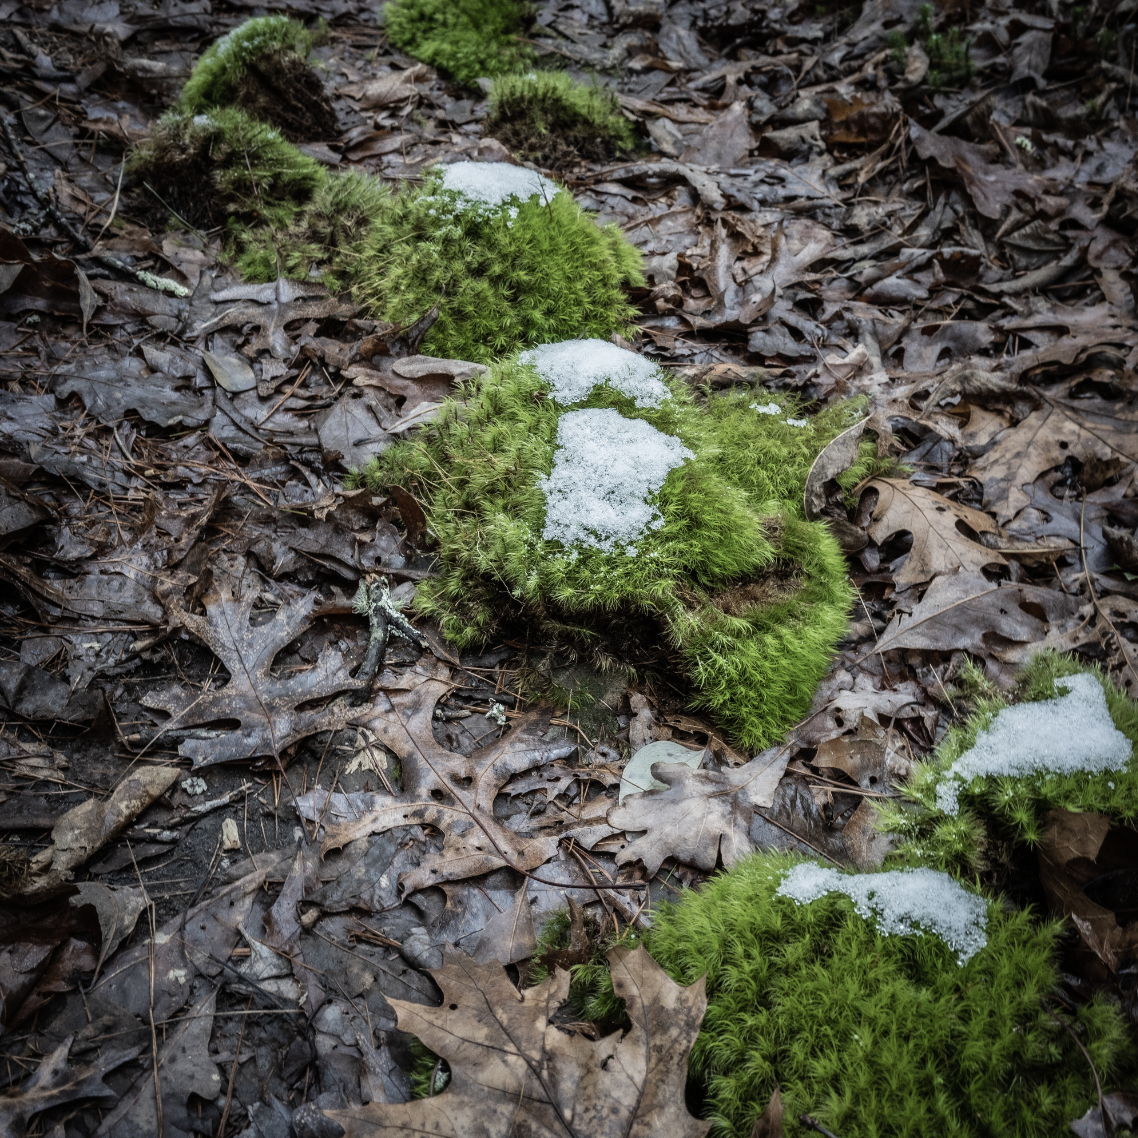 Closeup of a few clumps of moss on a damp leafy ground